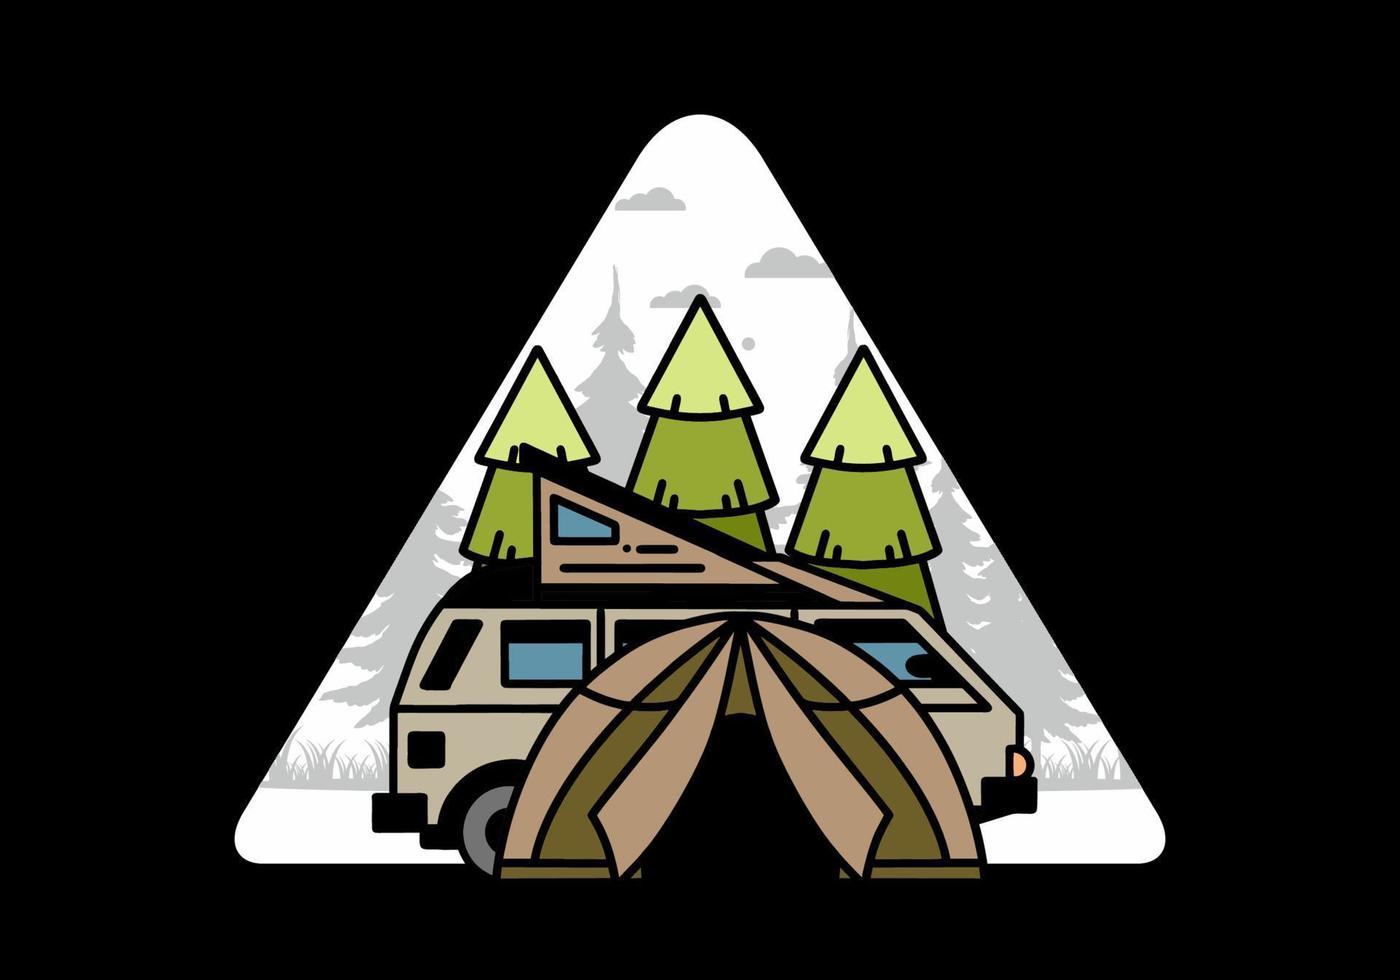 Camping with tent and car illustration design vector